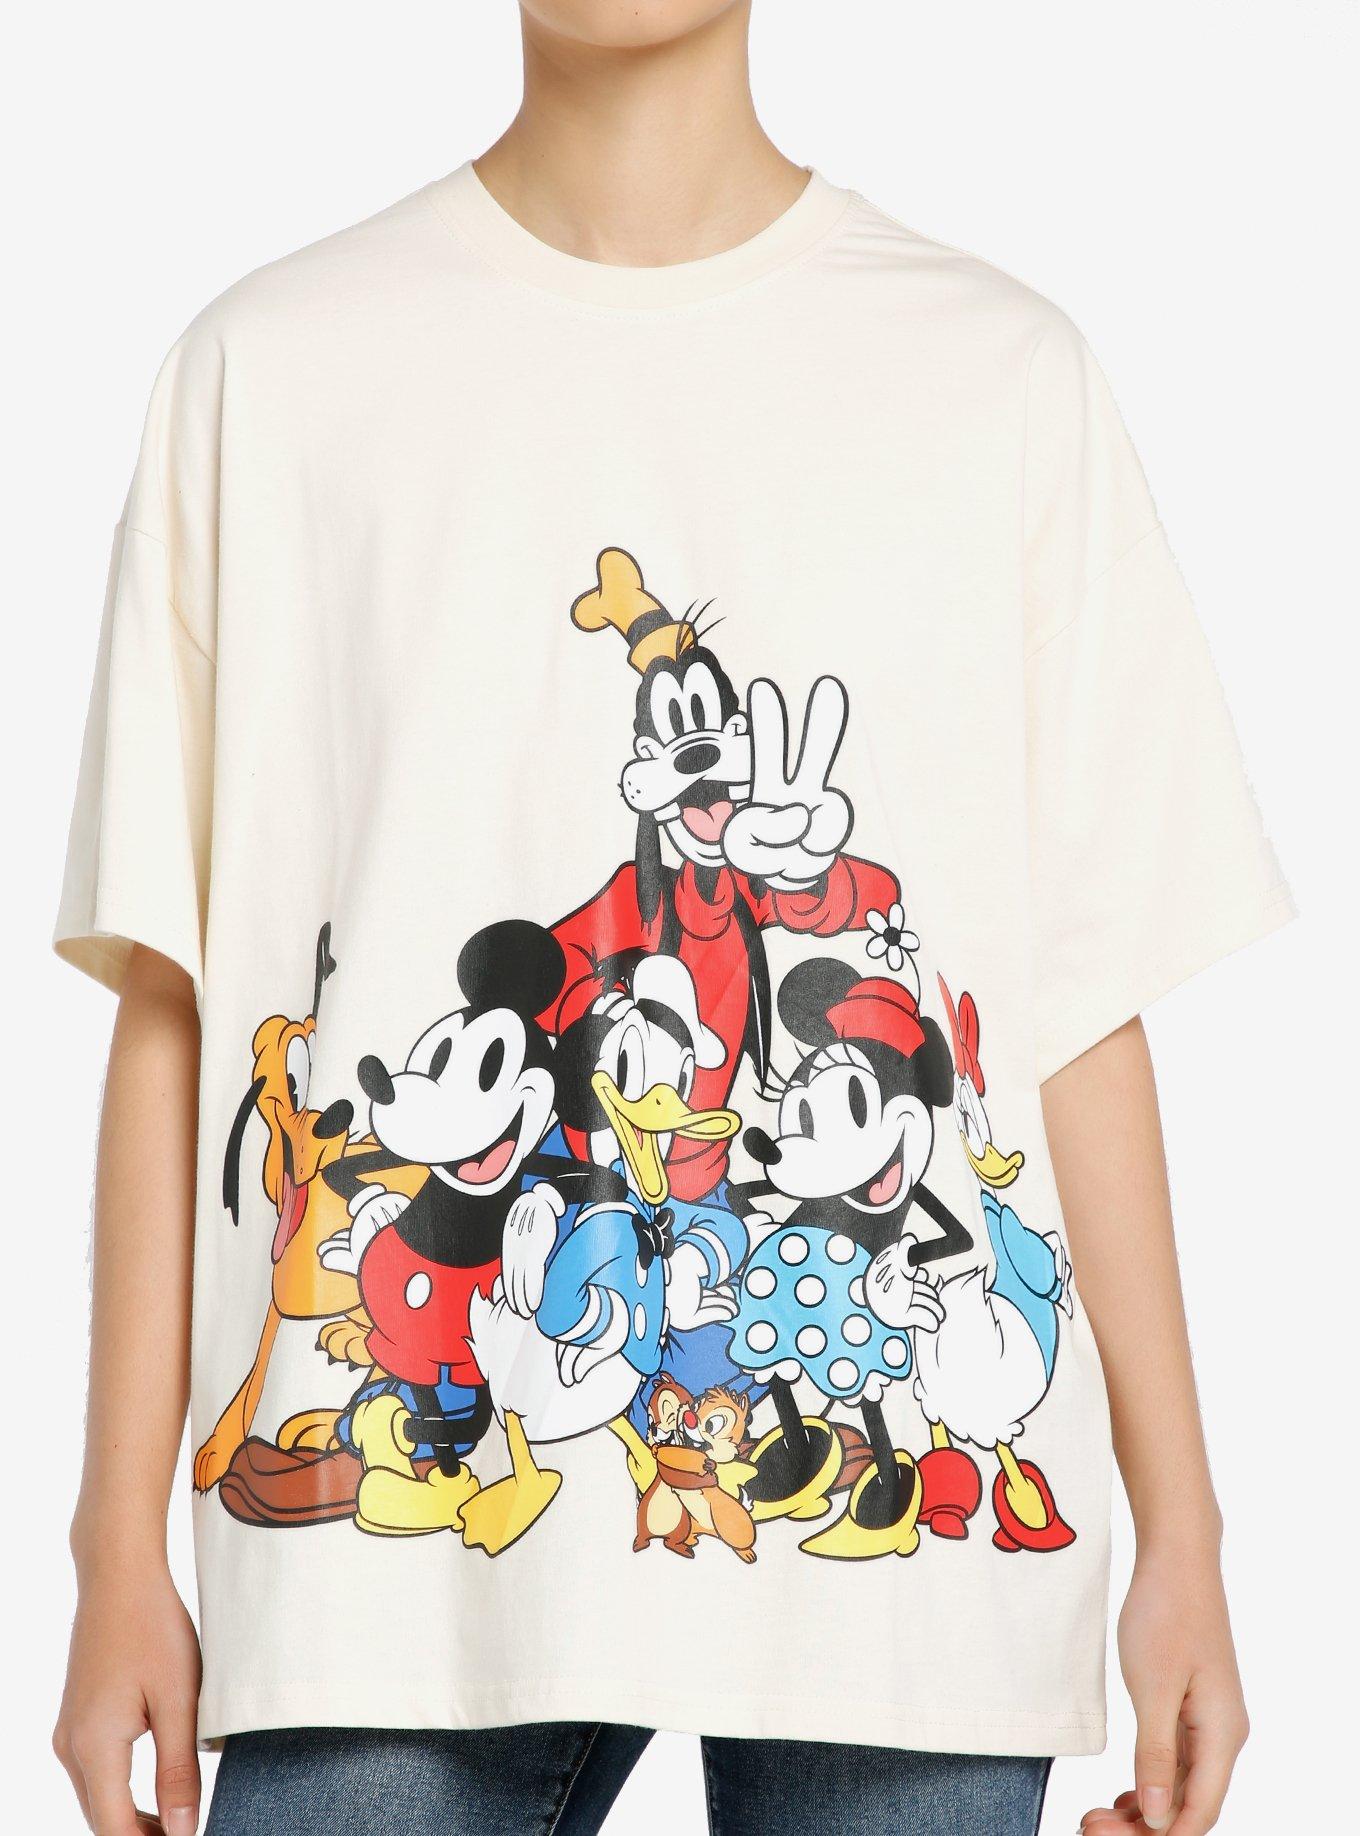 | Her Oversized Mouse Universe & Group Mickey Disney T-Shirt Back Friends And Front